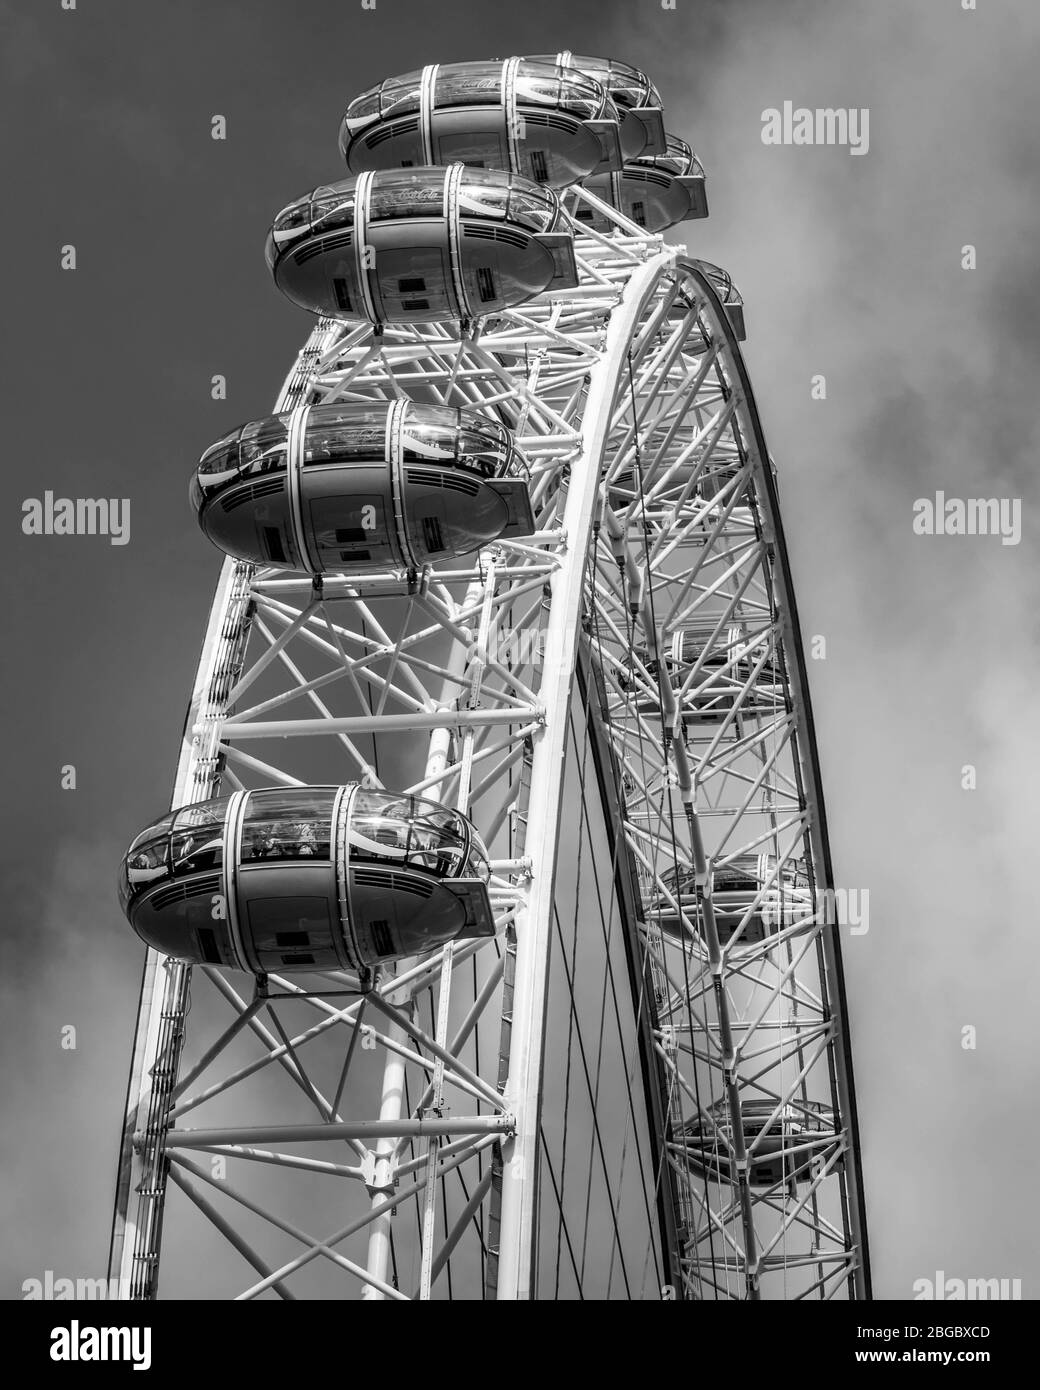 London Eye in black and white on a cloudy day Stock Photo